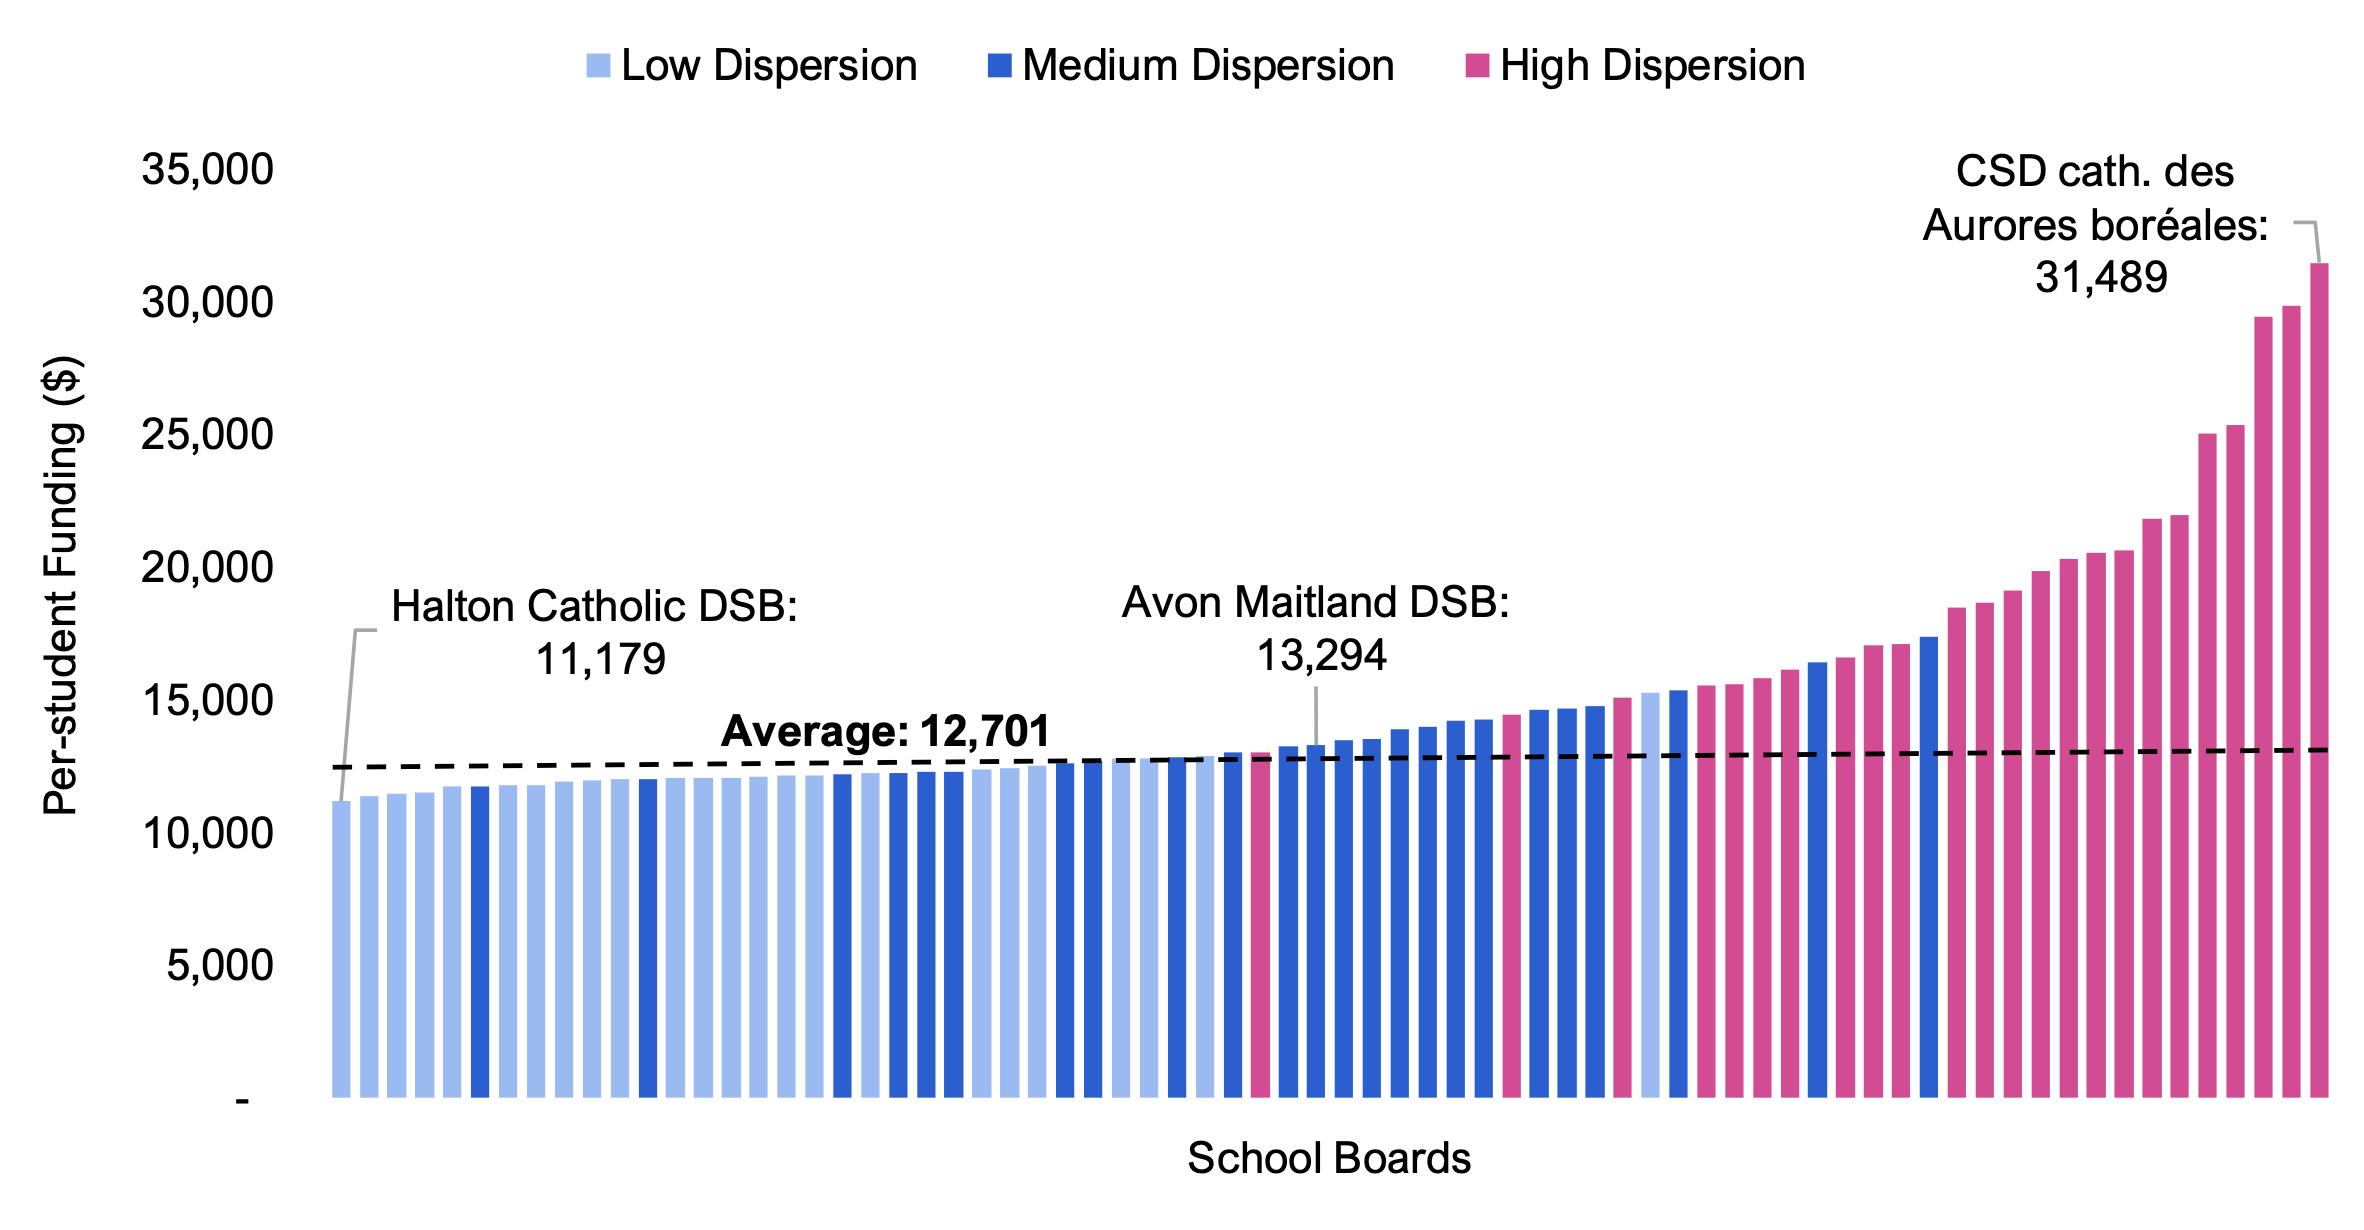 Figure 4.5 shows per-student GSN funding by school board, broken down by school board dispersion (low dispersion, medium dispersion, and high dispersion). The values range from a low of $11,179 for the Halton Catholic DSB to a high of $31,489 for the CSD catholique des Aurores boréales, with an overall average of $12,701. On average, high dispersion school boards received higher per-student GSN funding and low dispersion school boards received lower per-student GSN funding.